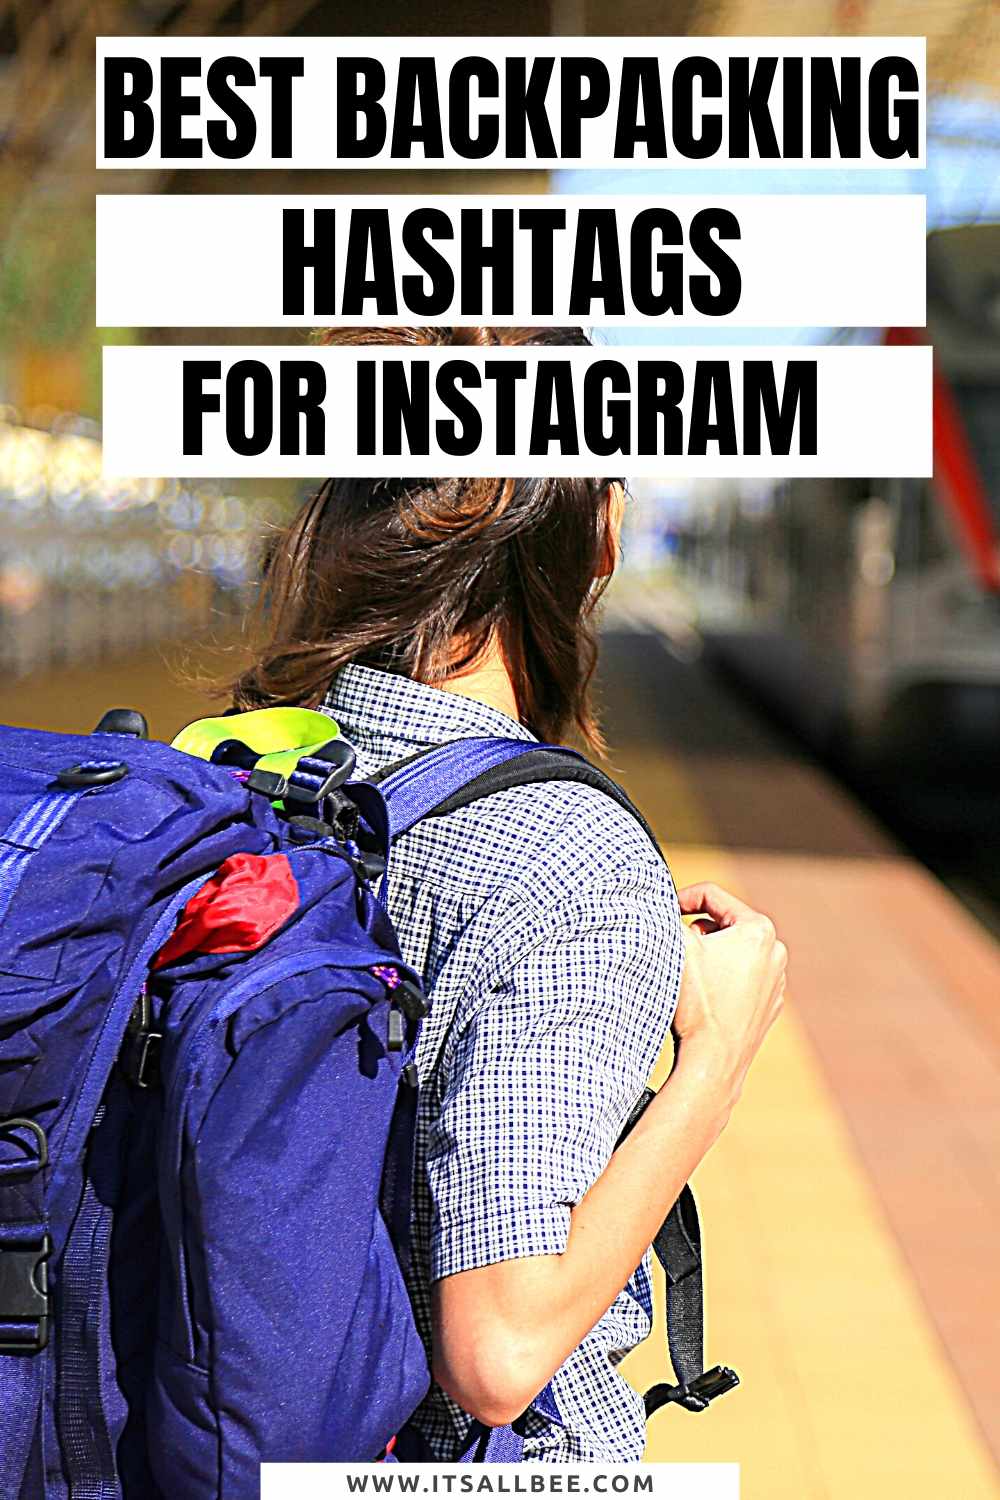 The Best Backpacking Hashtags For Instagram